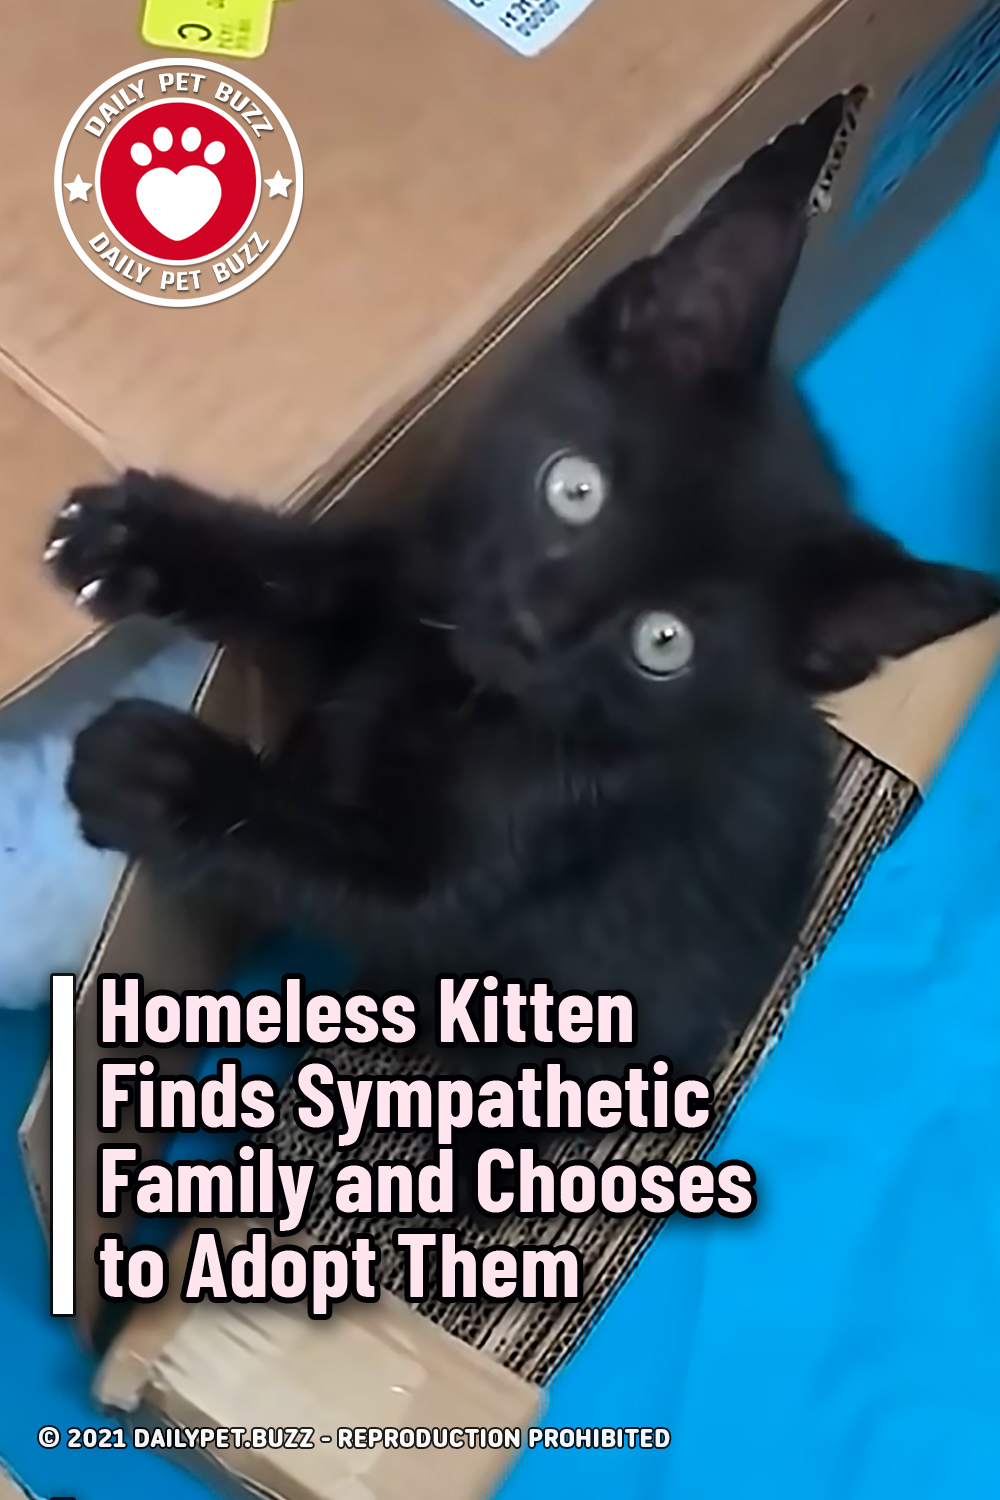 Homeless Kitten Finds Sympathetic Family and Chooses to Adopt Them